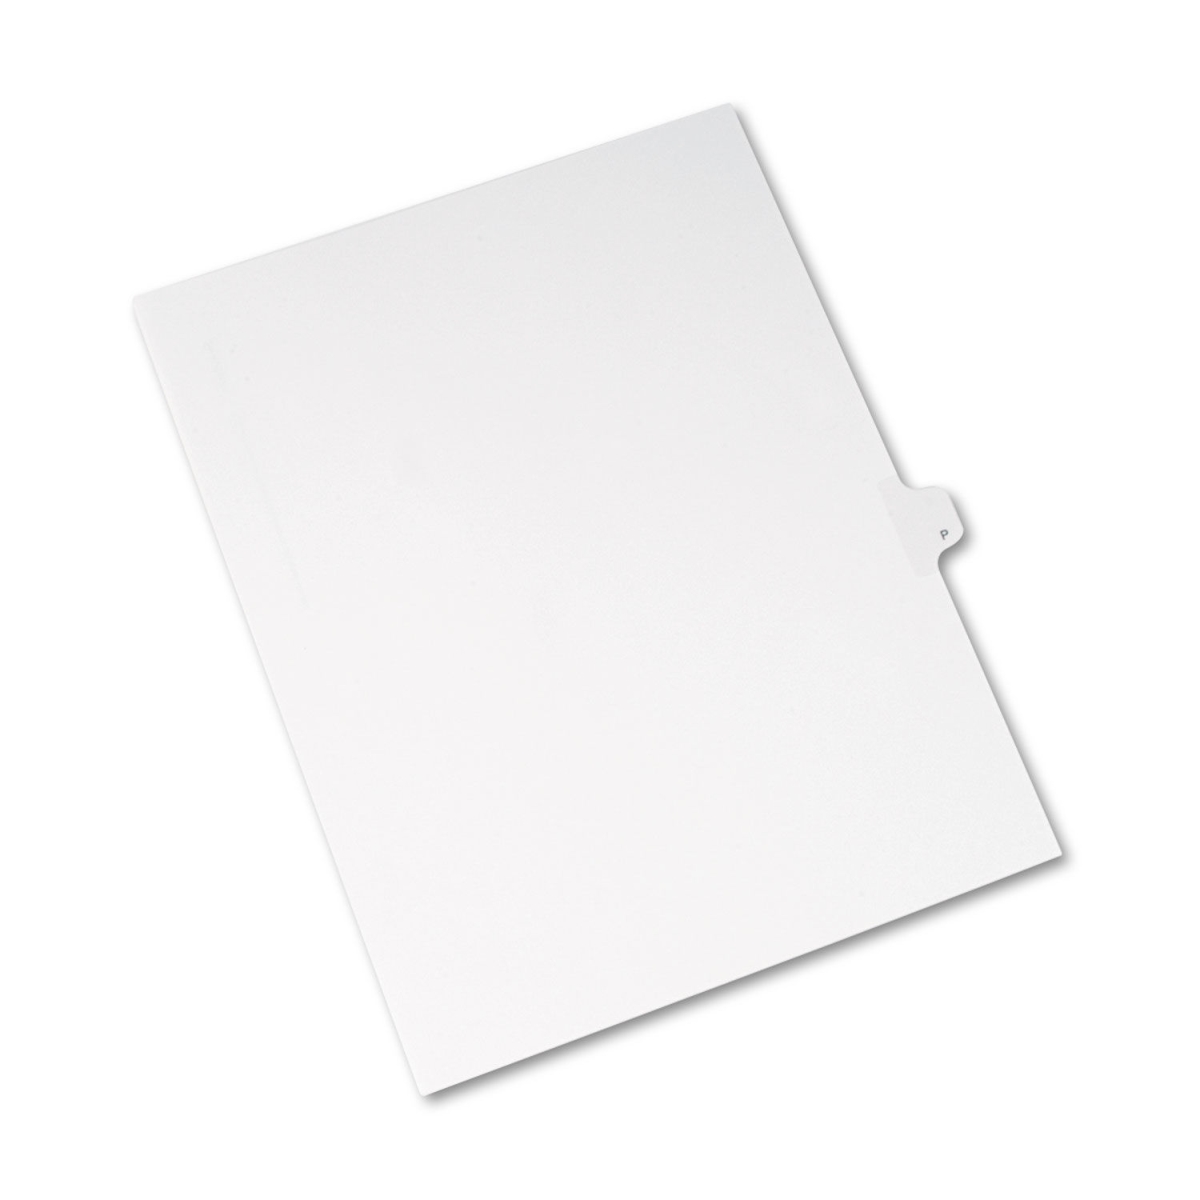 UPC 758218000007 product image for AVE Individual Legal Exhibit Dividers - Allstate Style, White - Pack of 25 | upcitemdb.com